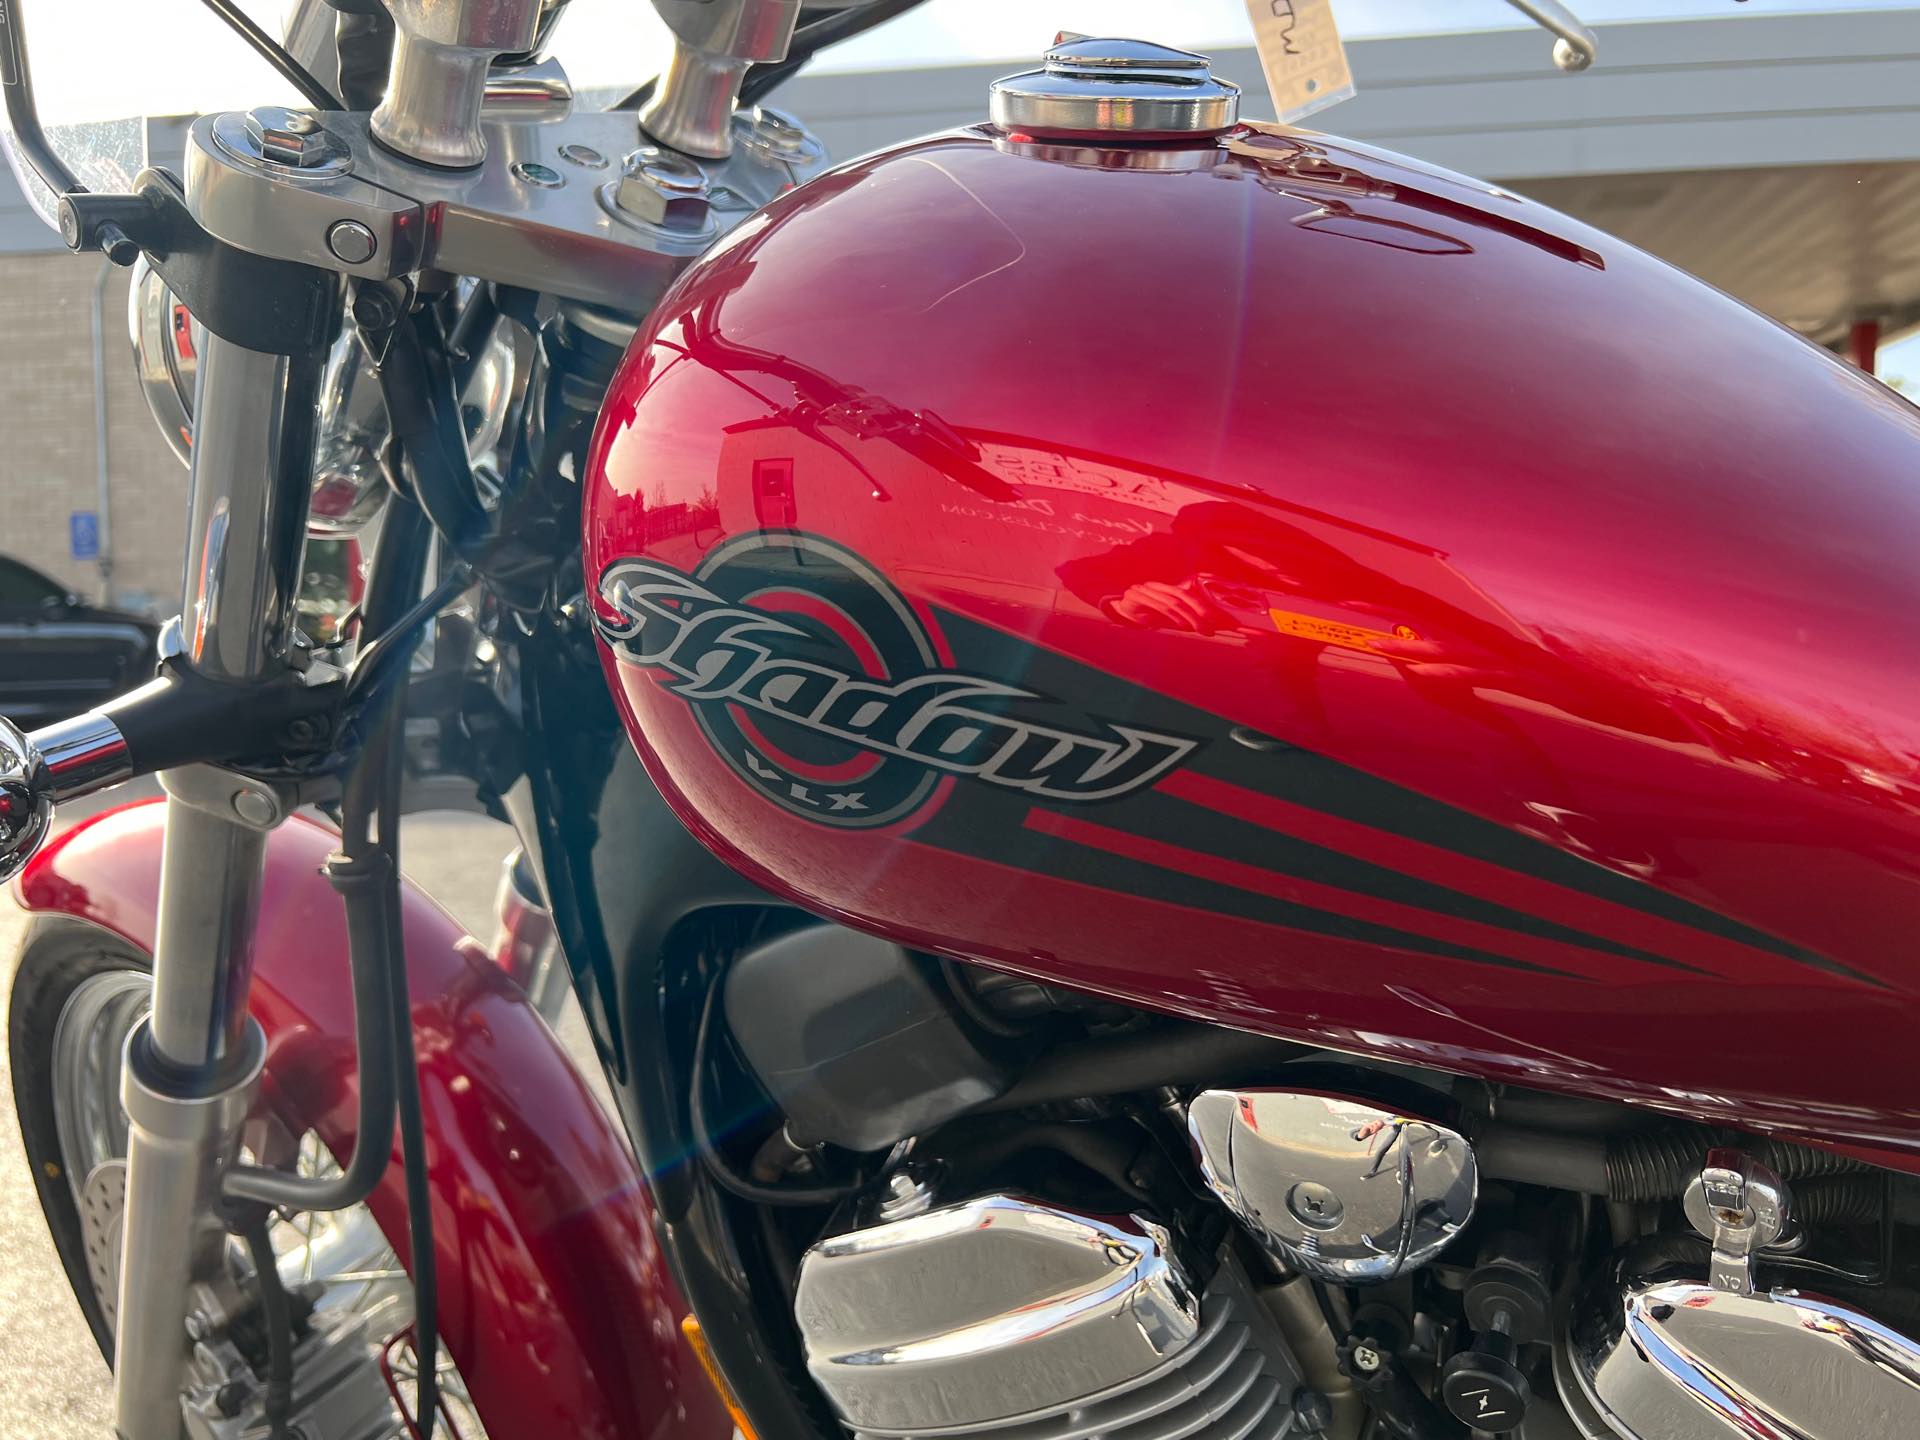 2007 Honda Shadow VLX Deluxe at Aces Motorcycles - Fort Collins